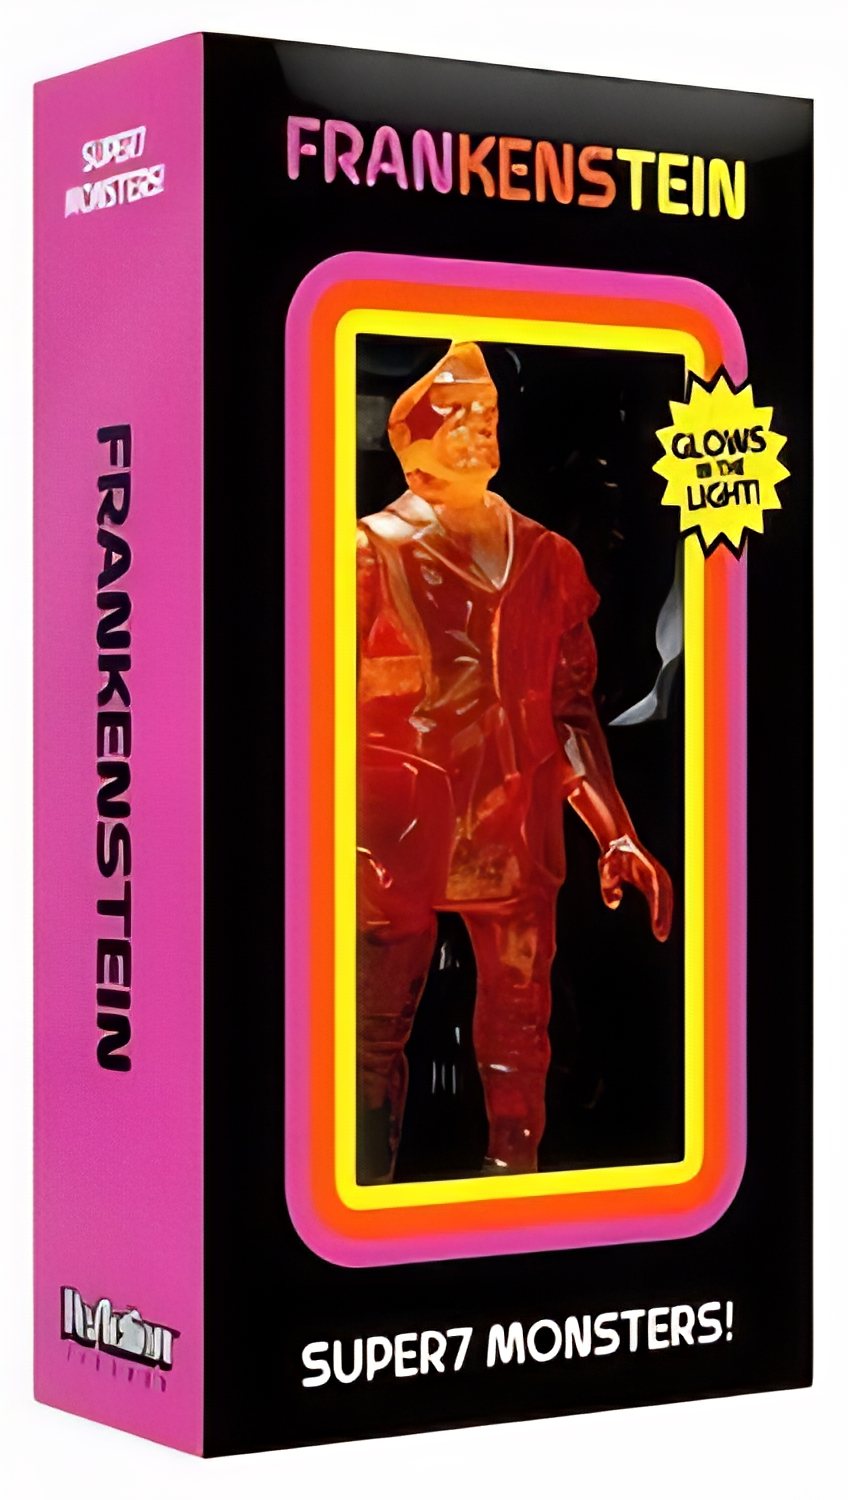 Super7: ReAction (Universal Monsters), Frankenstein (Glows in the Light) (TL)